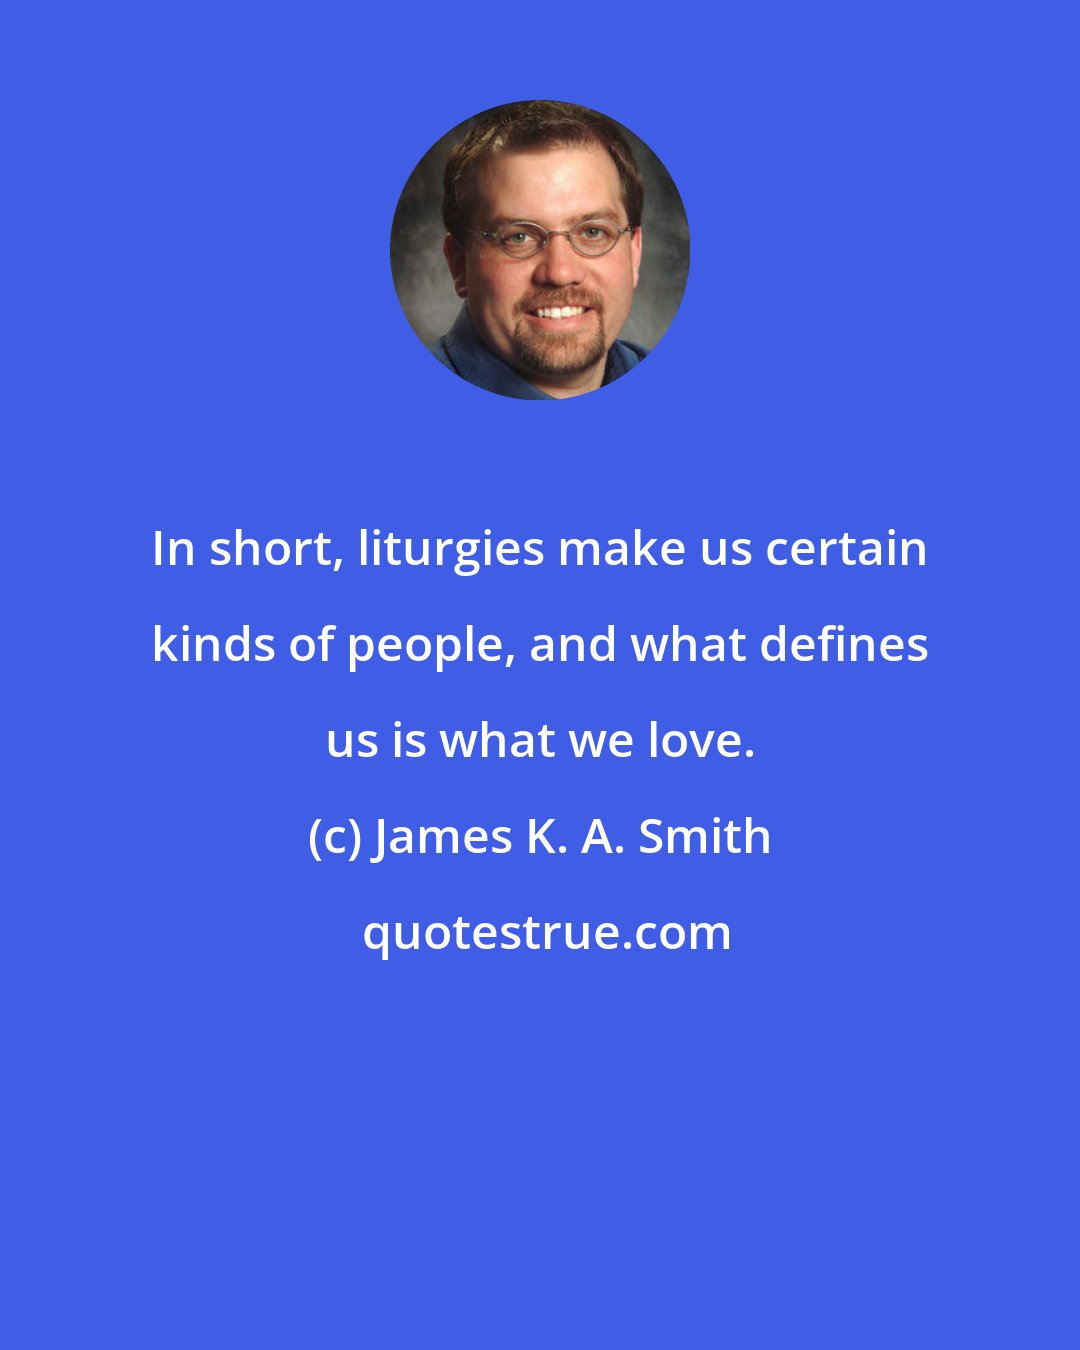 James K. A. Smith: In short, liturgies make us certain kinds of people, and what defines us is what we love.